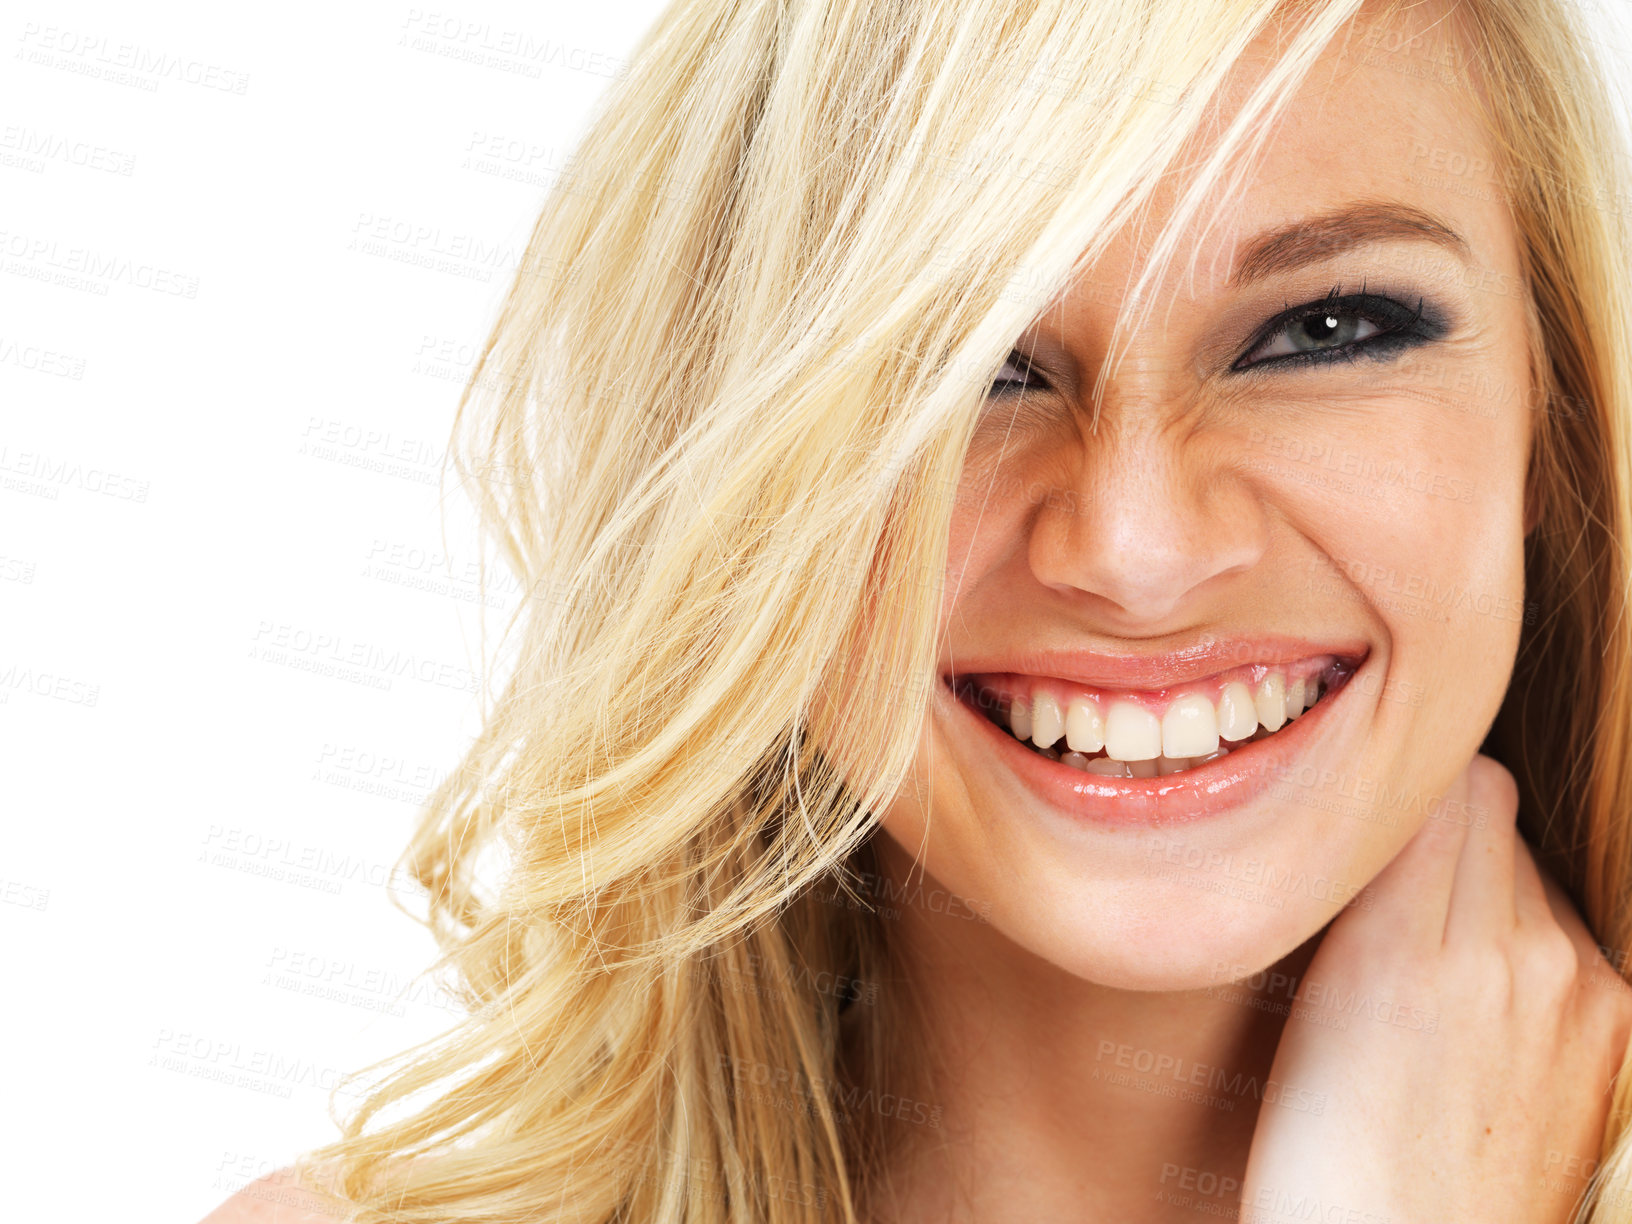 Buy stock photo Portrait of a young blonde woman laughing